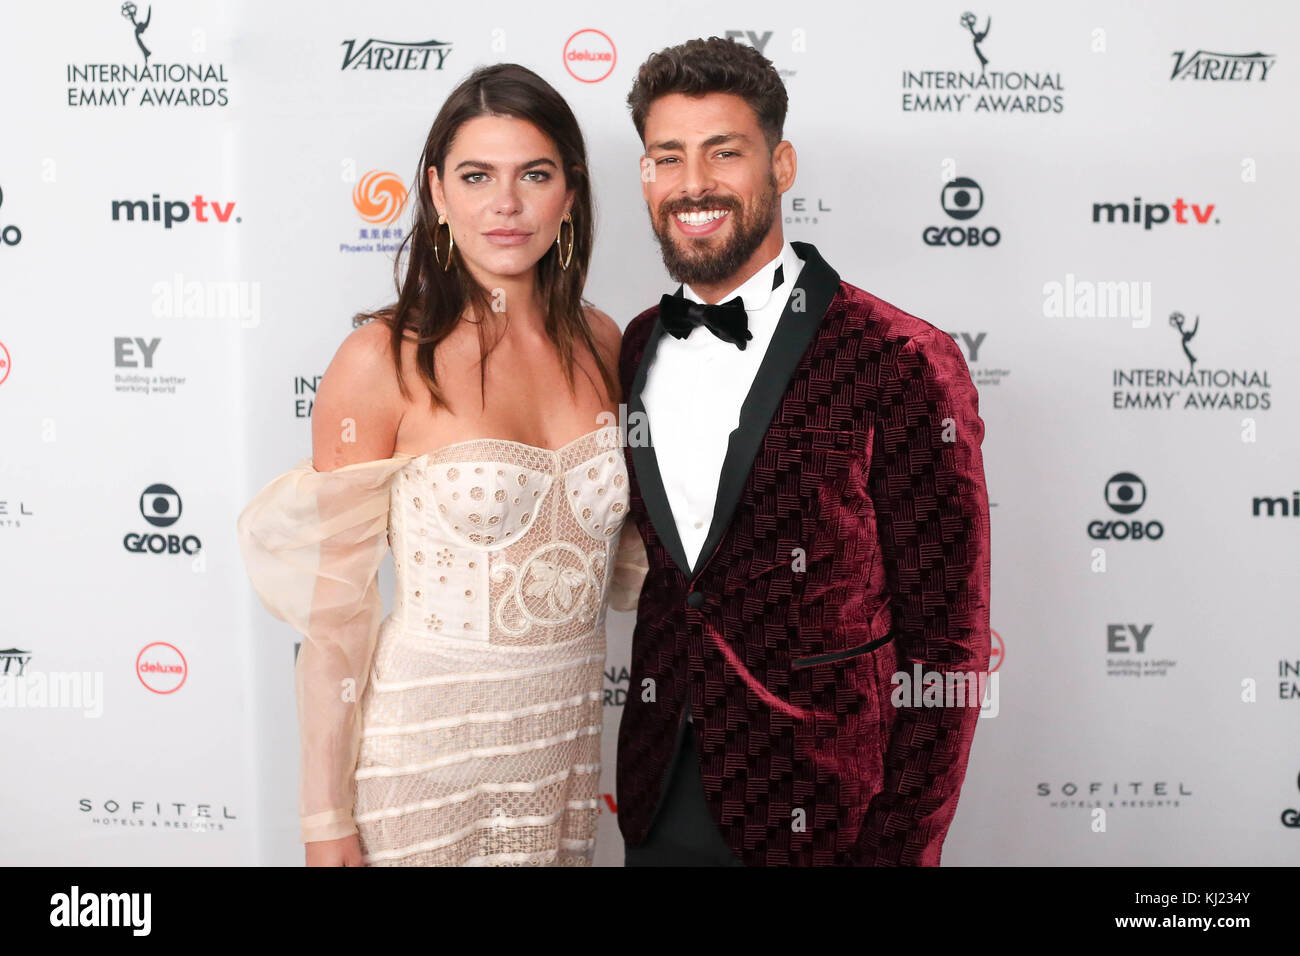 New York, USA. 20th November, 2017. Mariana Goldfarb  and Cauã Reymond during the 45th International Emmy awards gala in New York city on November 20, 2017. The International Emmy Award is an award ceremony bestowed by the International Academy of Television Arts and Sciences in recognition to the best television programs initially produced and aired outside the United States.   (PHOTO: WILLIAM VOLCOV/BRAZIL PHOTO PRESS) Stock Photo